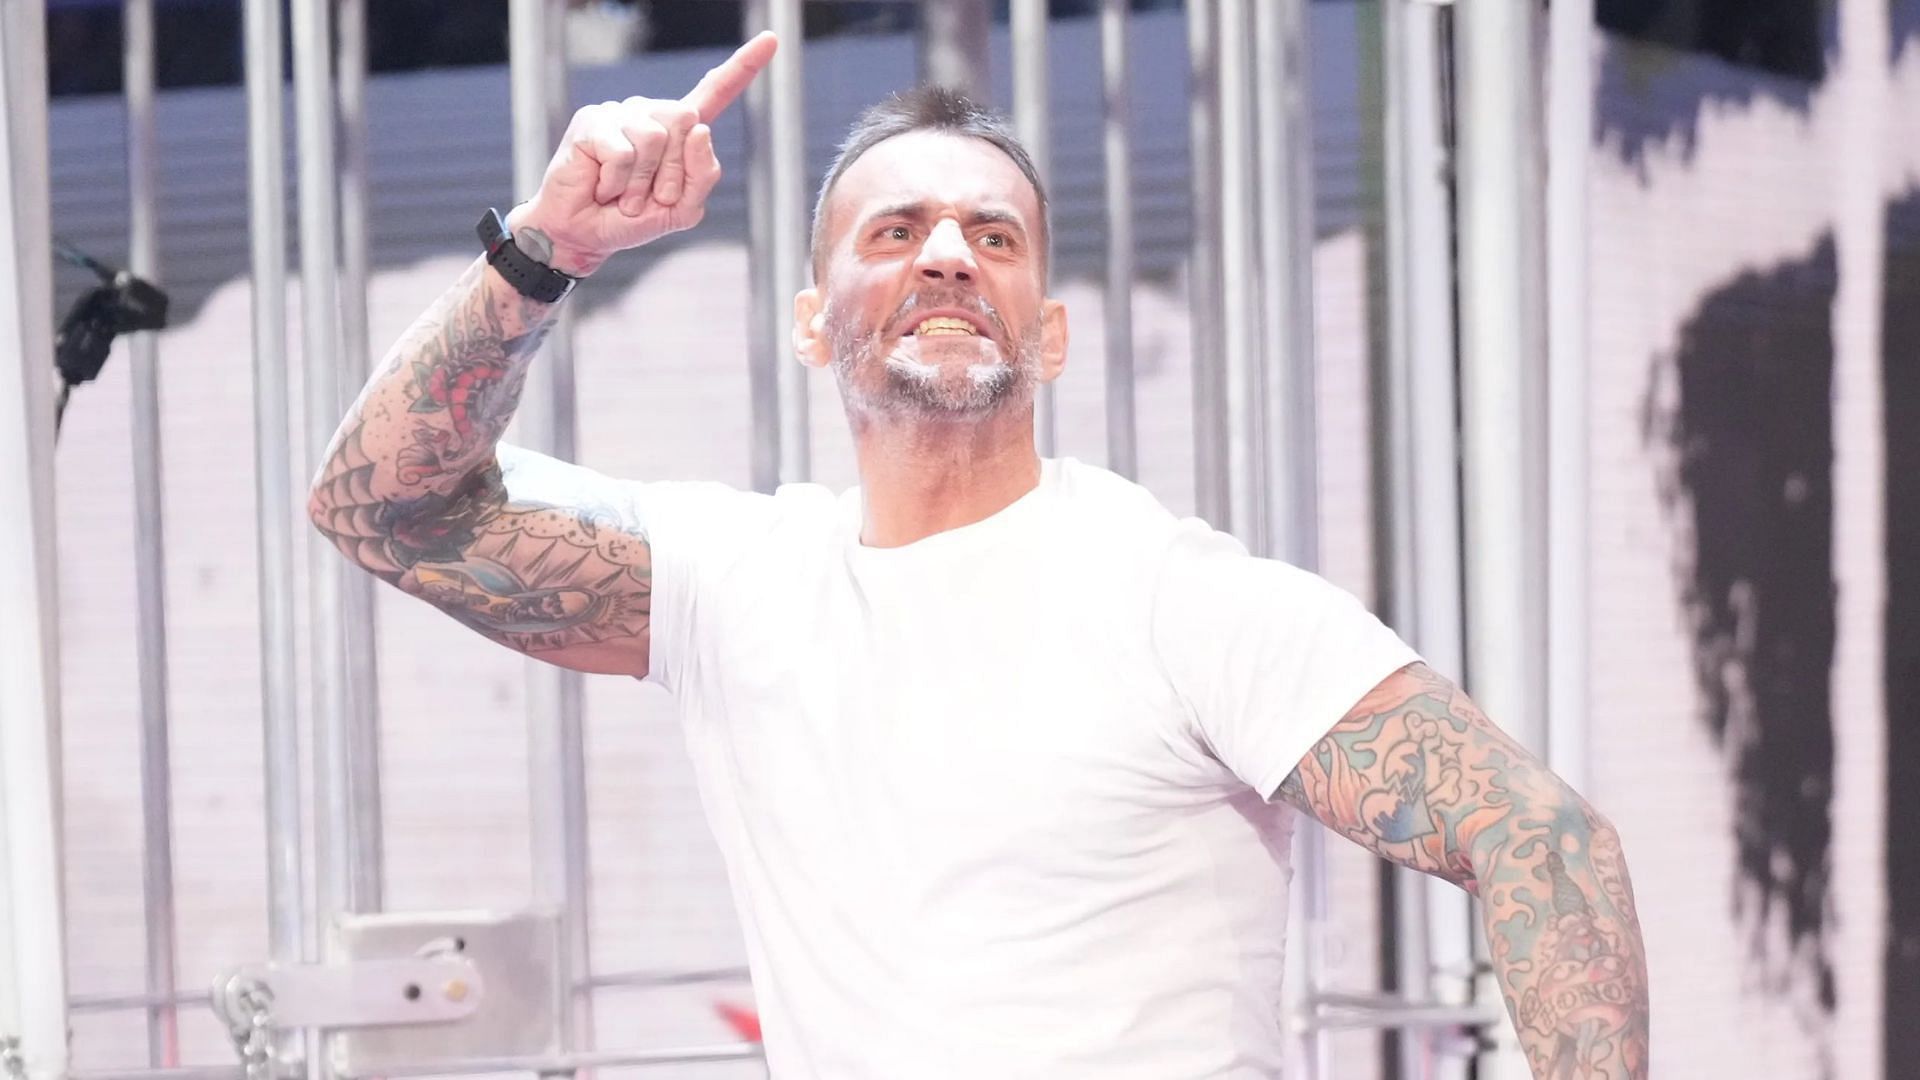 Punk is scheduled to appear tonight on RAW.